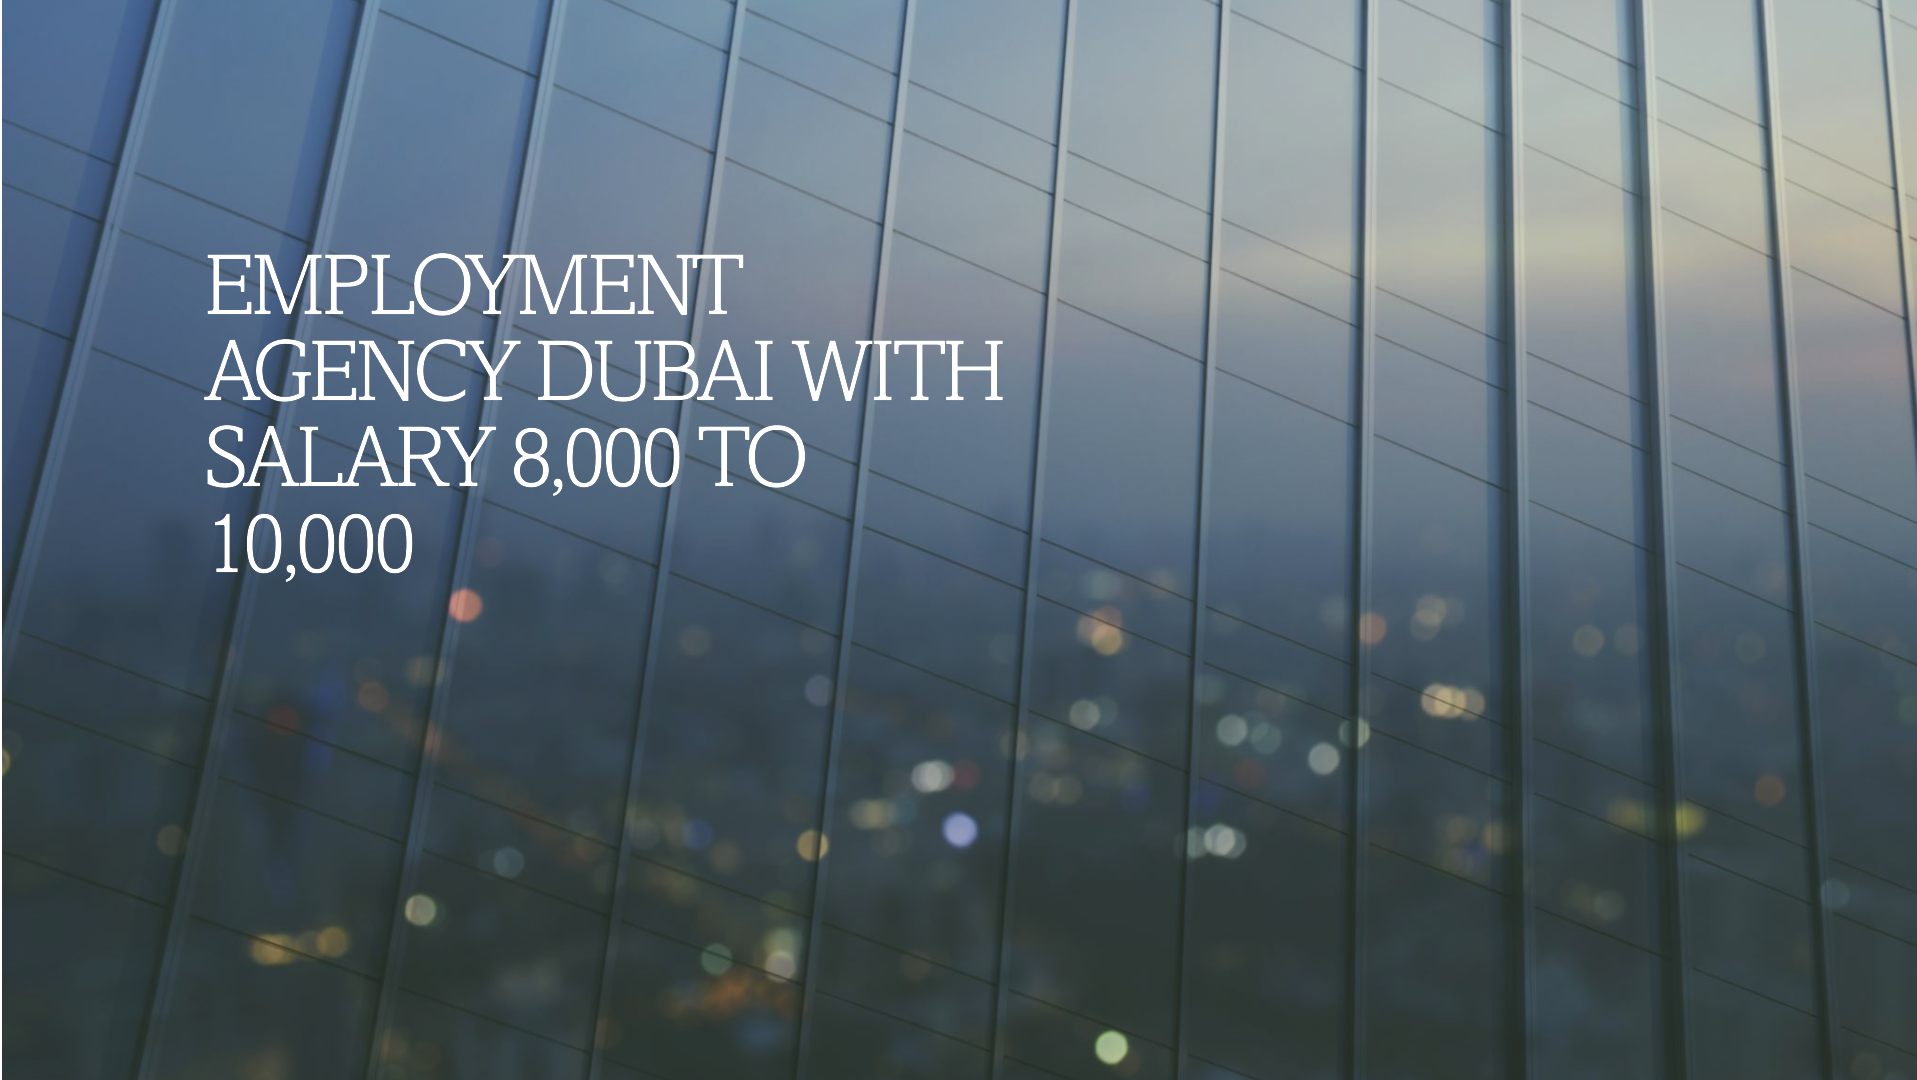 employment agency dubai with salary 8,000 to 10,000